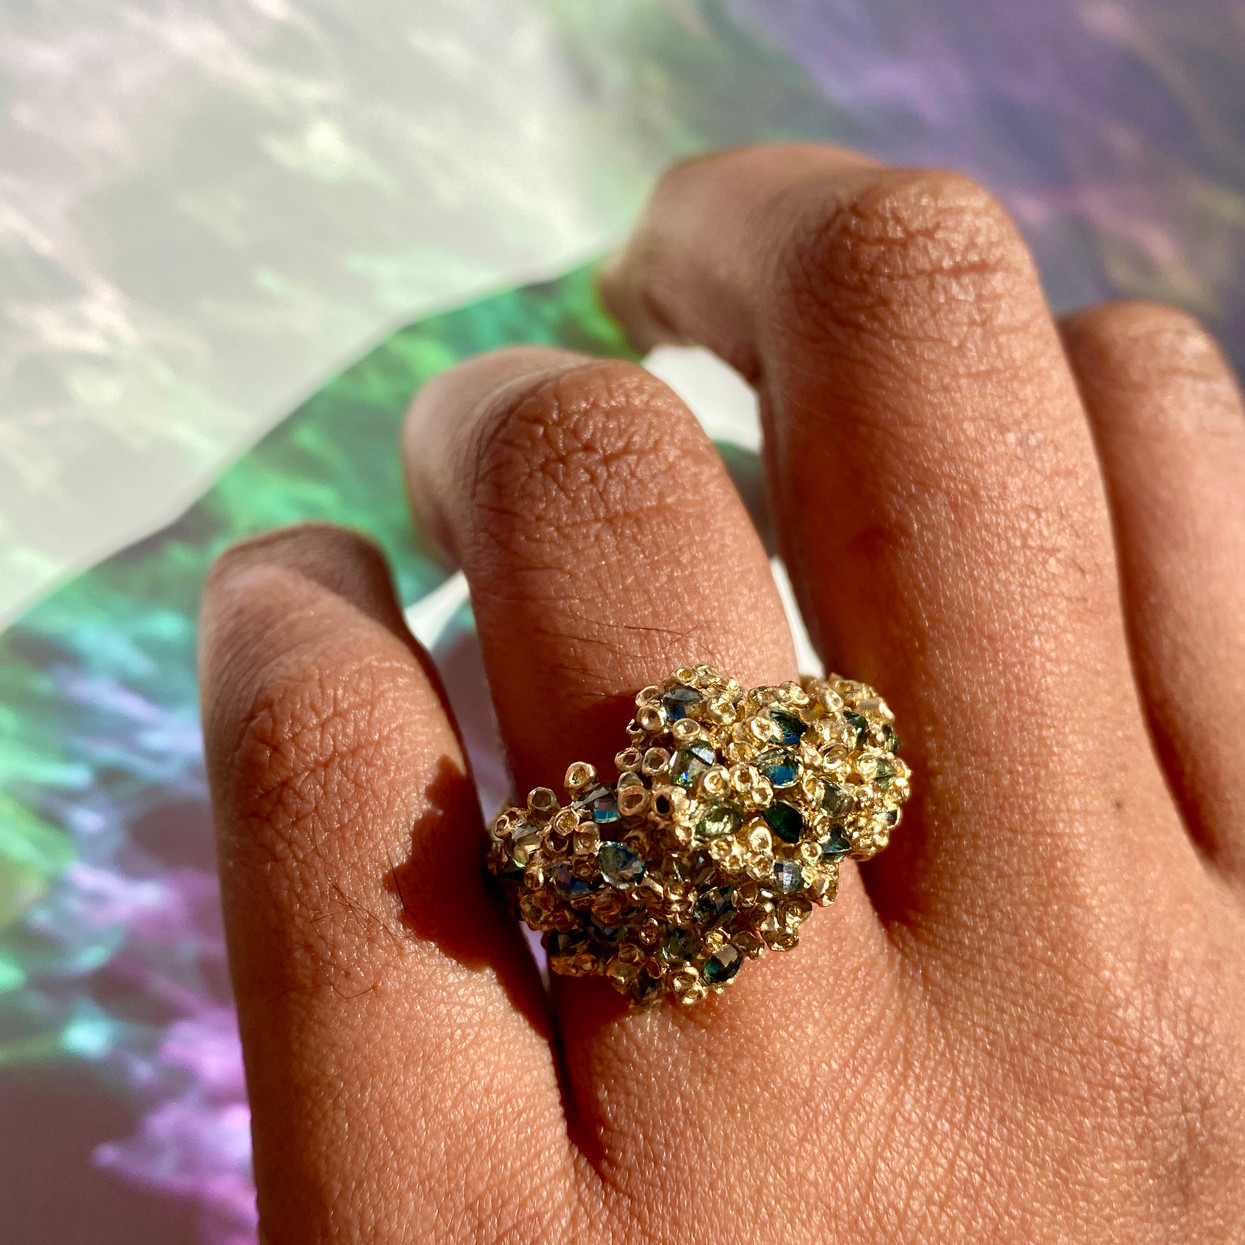 CORAL & BARNACLE CLUSTER ART RING By Ami Pepper